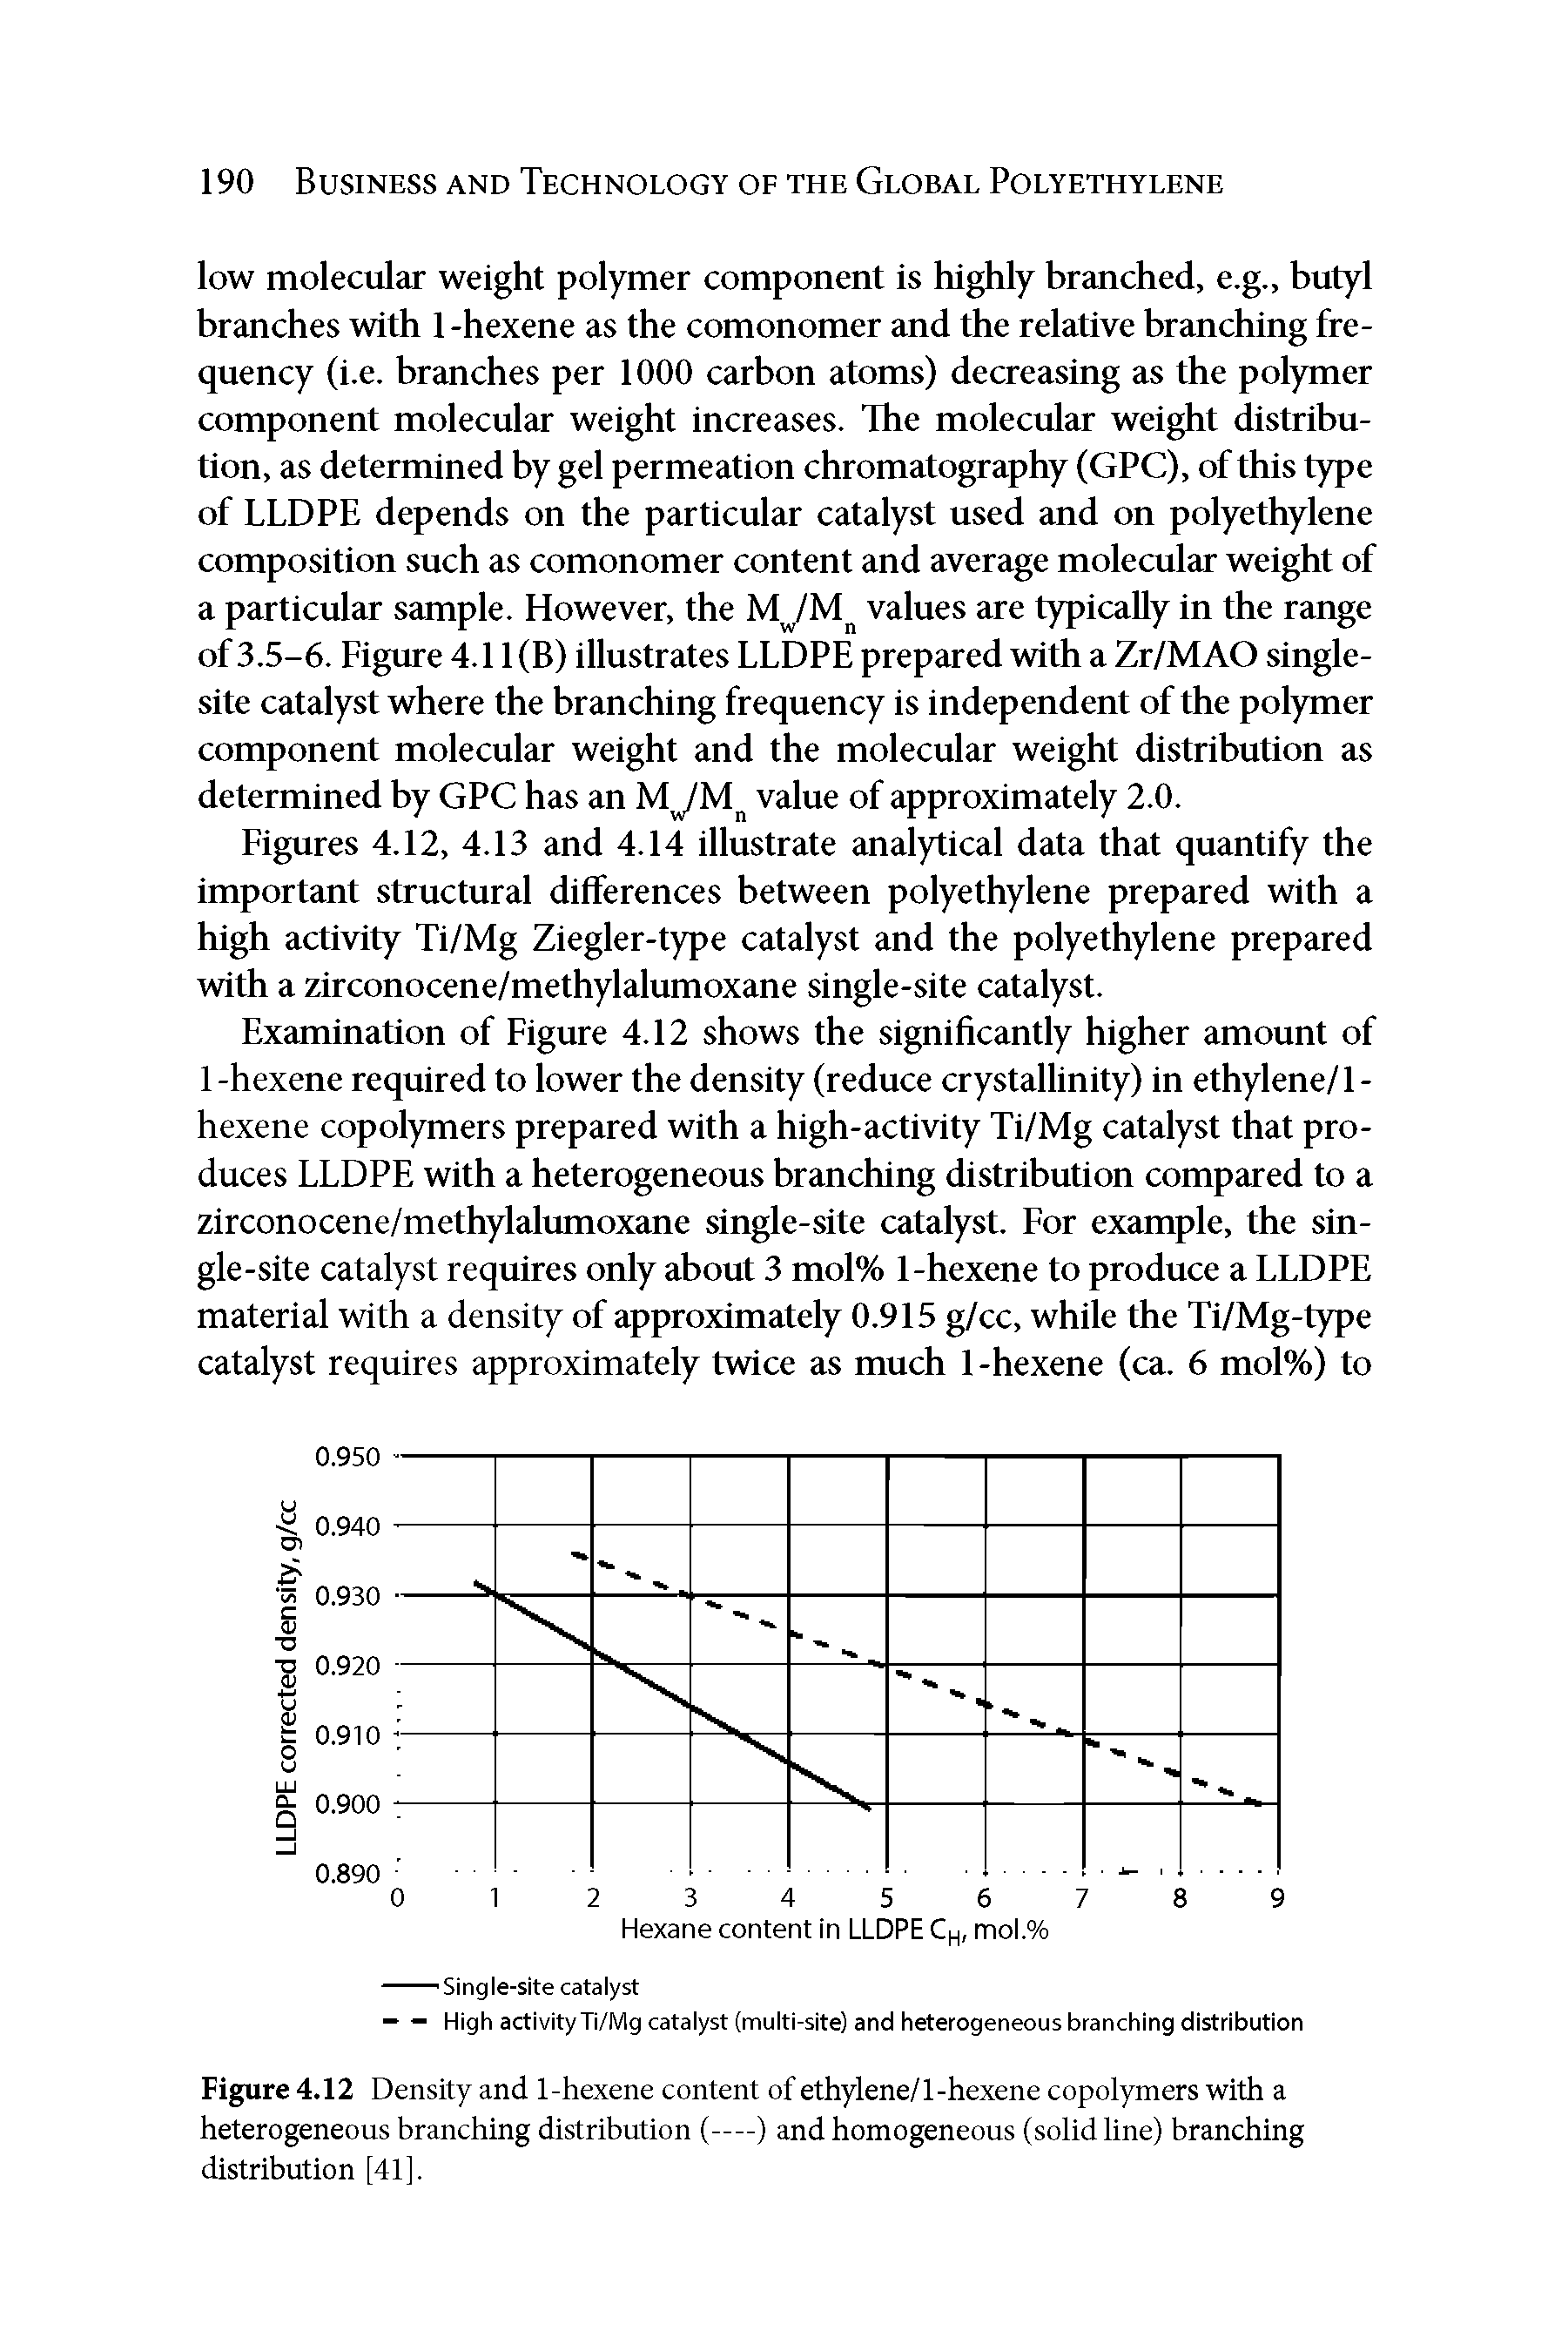 Figure 4.12 Density and 1-hexene content of ethylene/1-hexene copolymers with a heterogeneous branching distribution (—) and homogeneous (solid line) branching distribution [41].